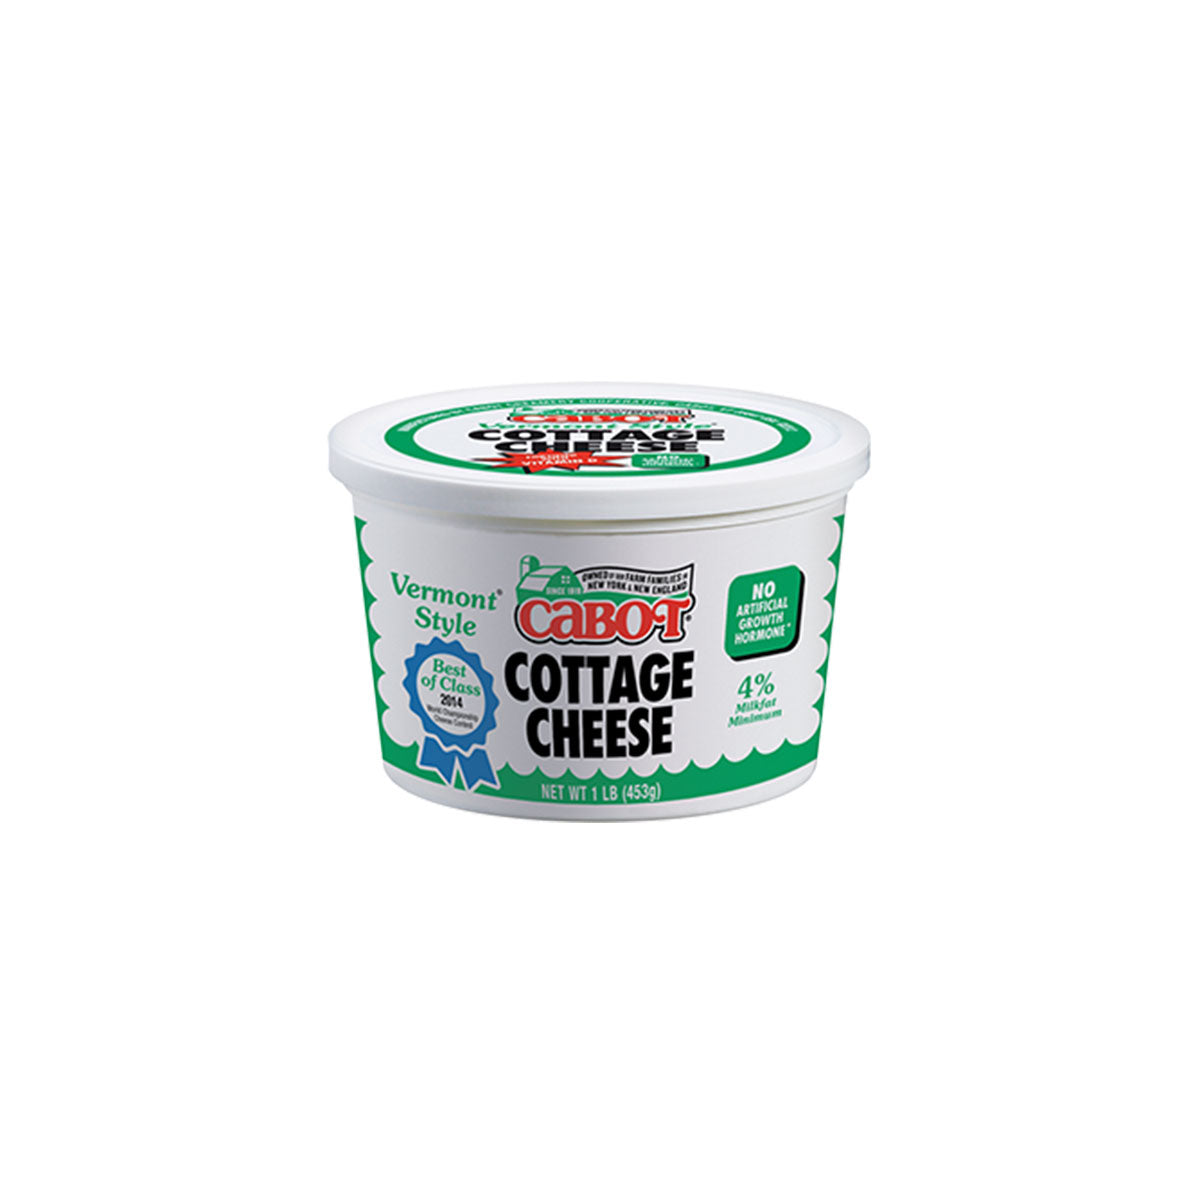 Cabot Creamery Cottage Cheese 1 lb Jar